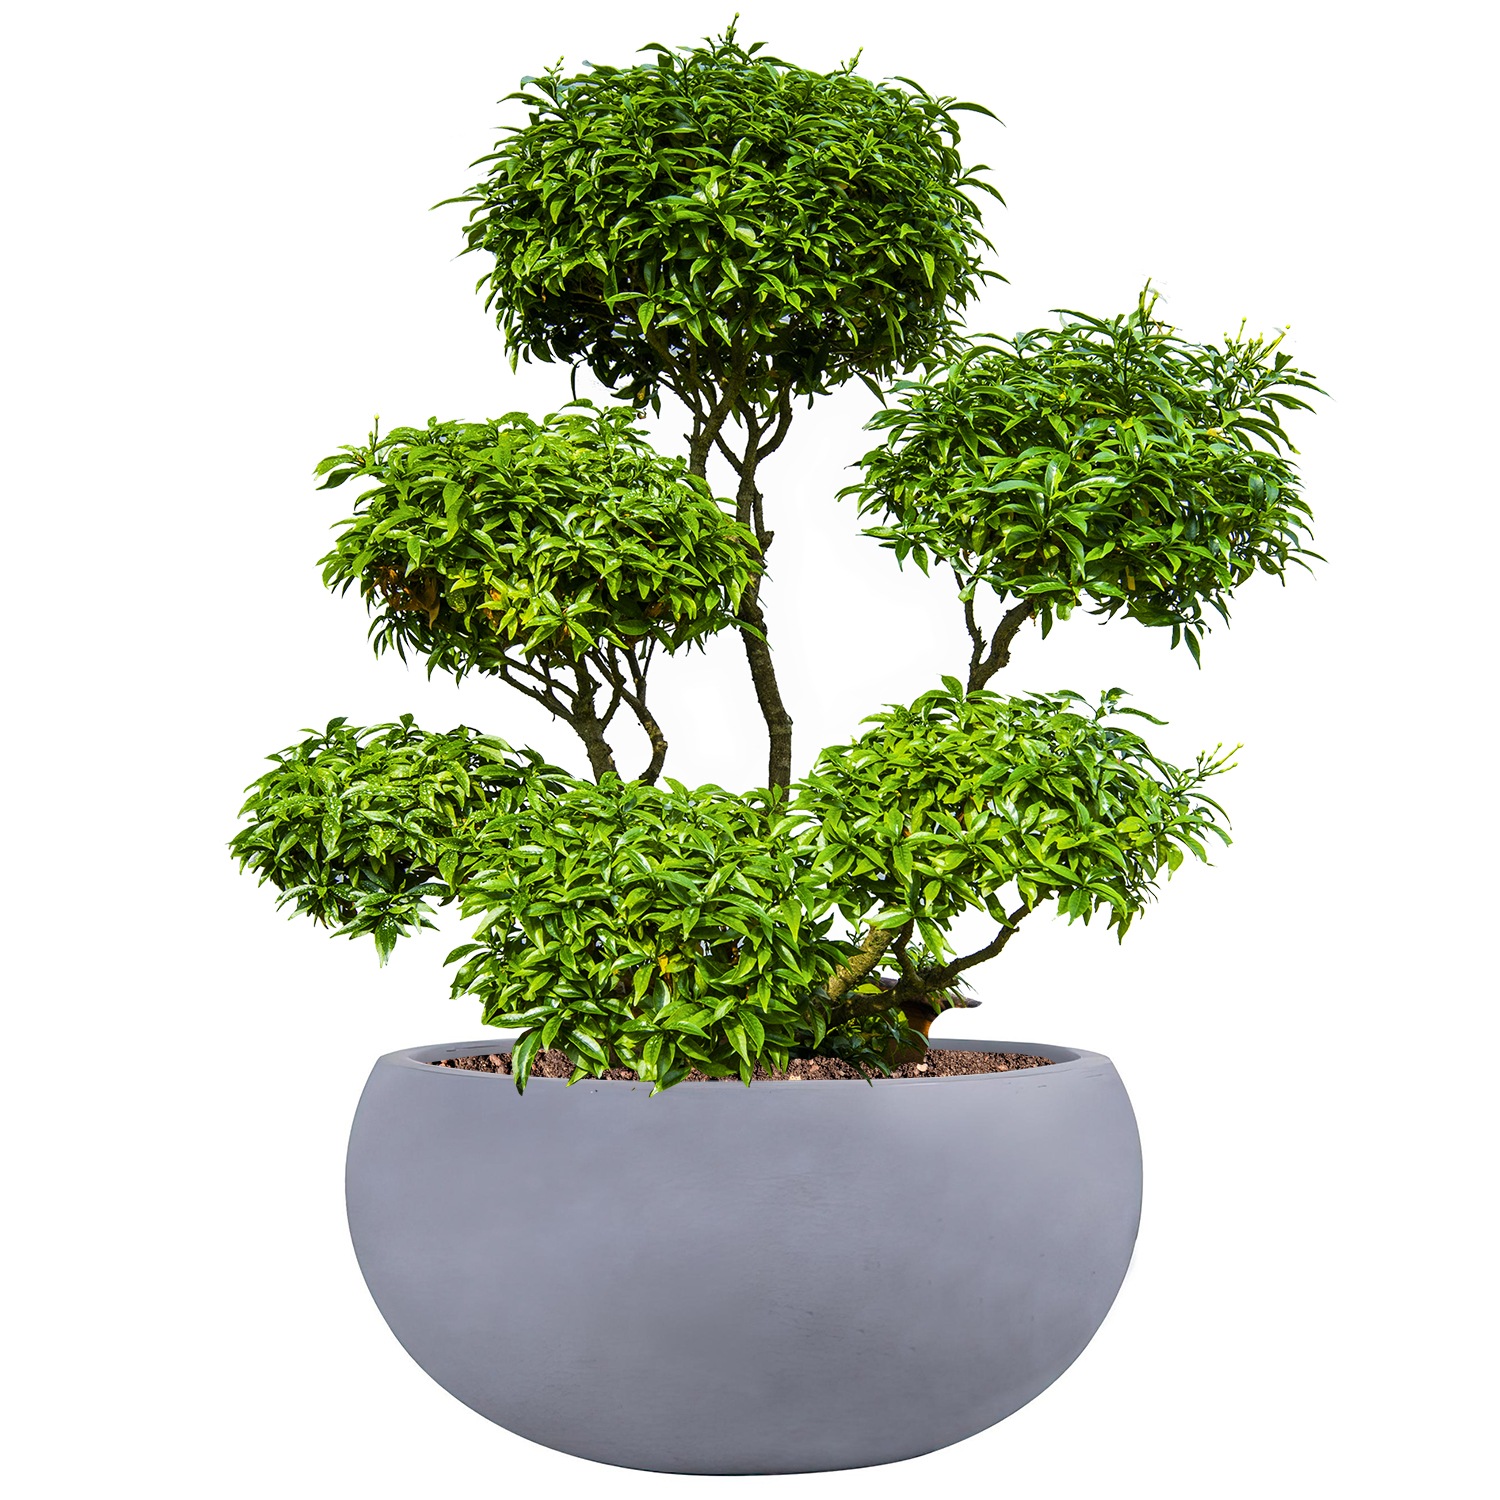 Classic Smooth Light Grey Bowl Outdoor Planter D55 H26 cm, 61.8 ltrs Cap.